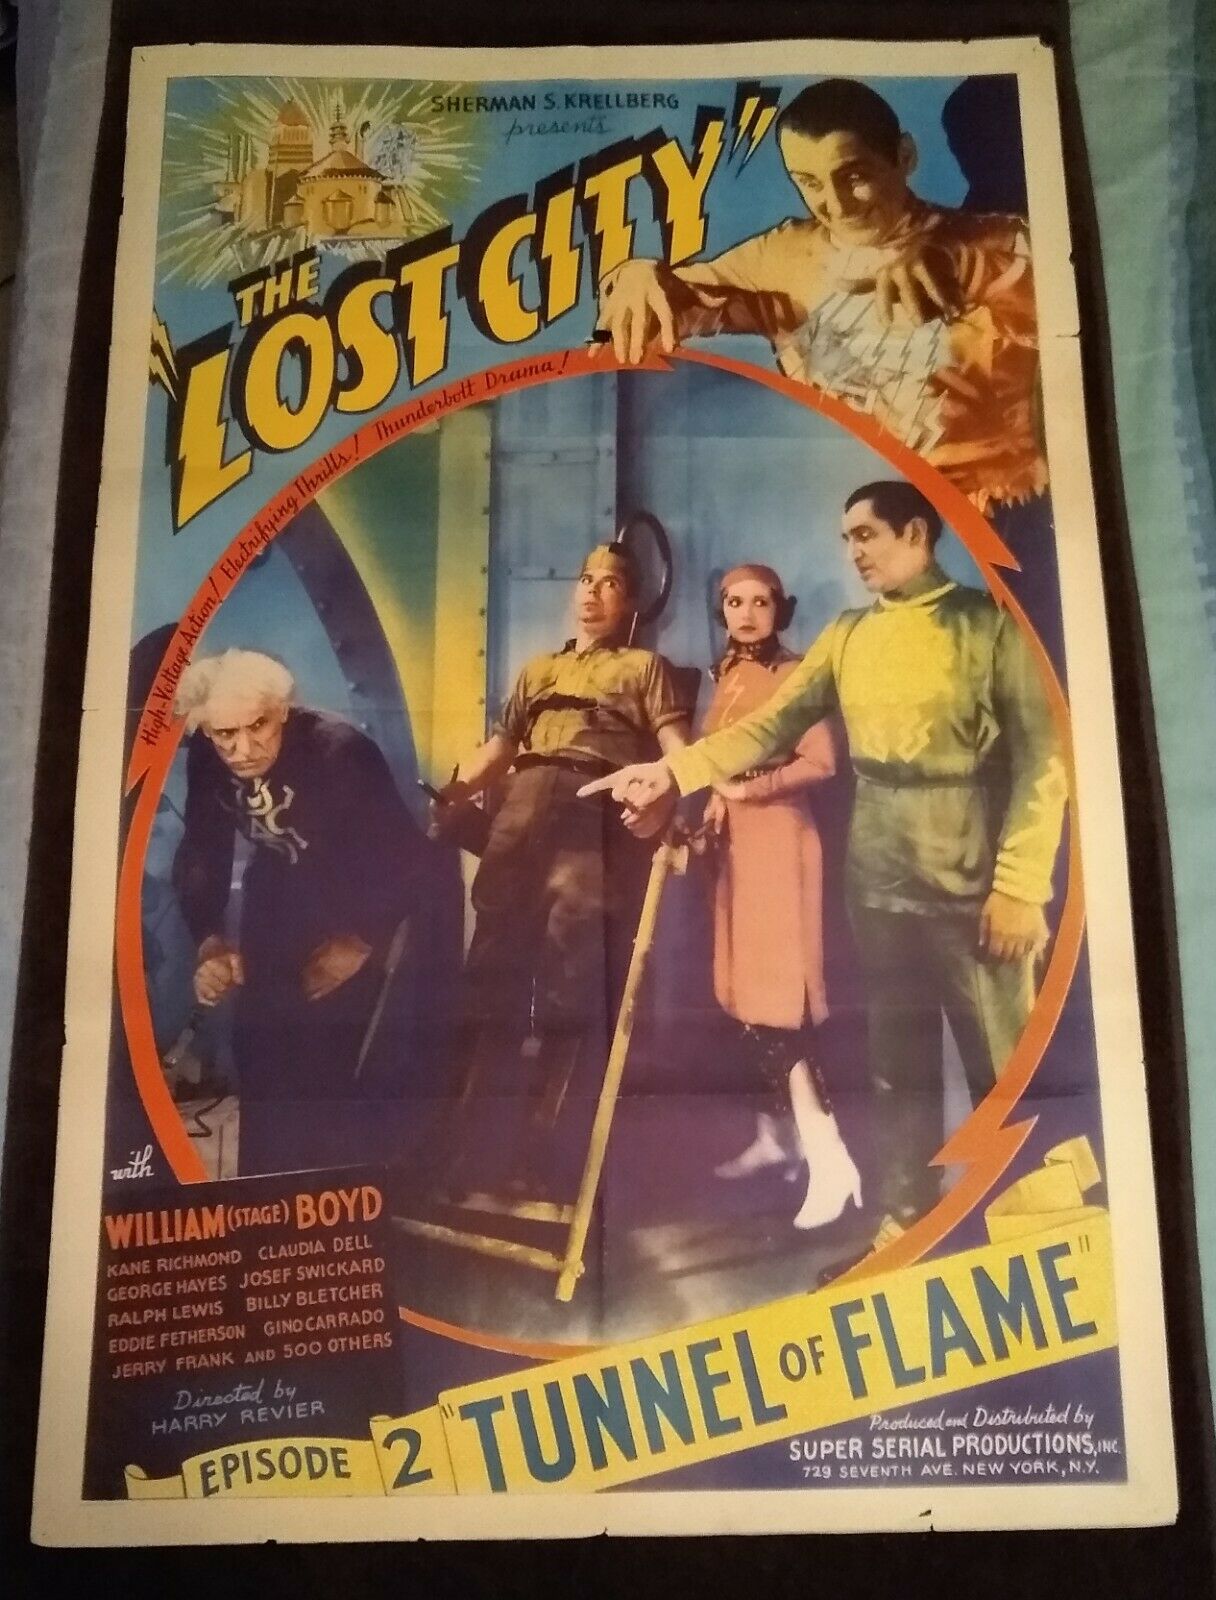 The Lost City 1935 Vintage 1-sheet Poster (chptr 2 Tunnel Of Flame) William Boyd